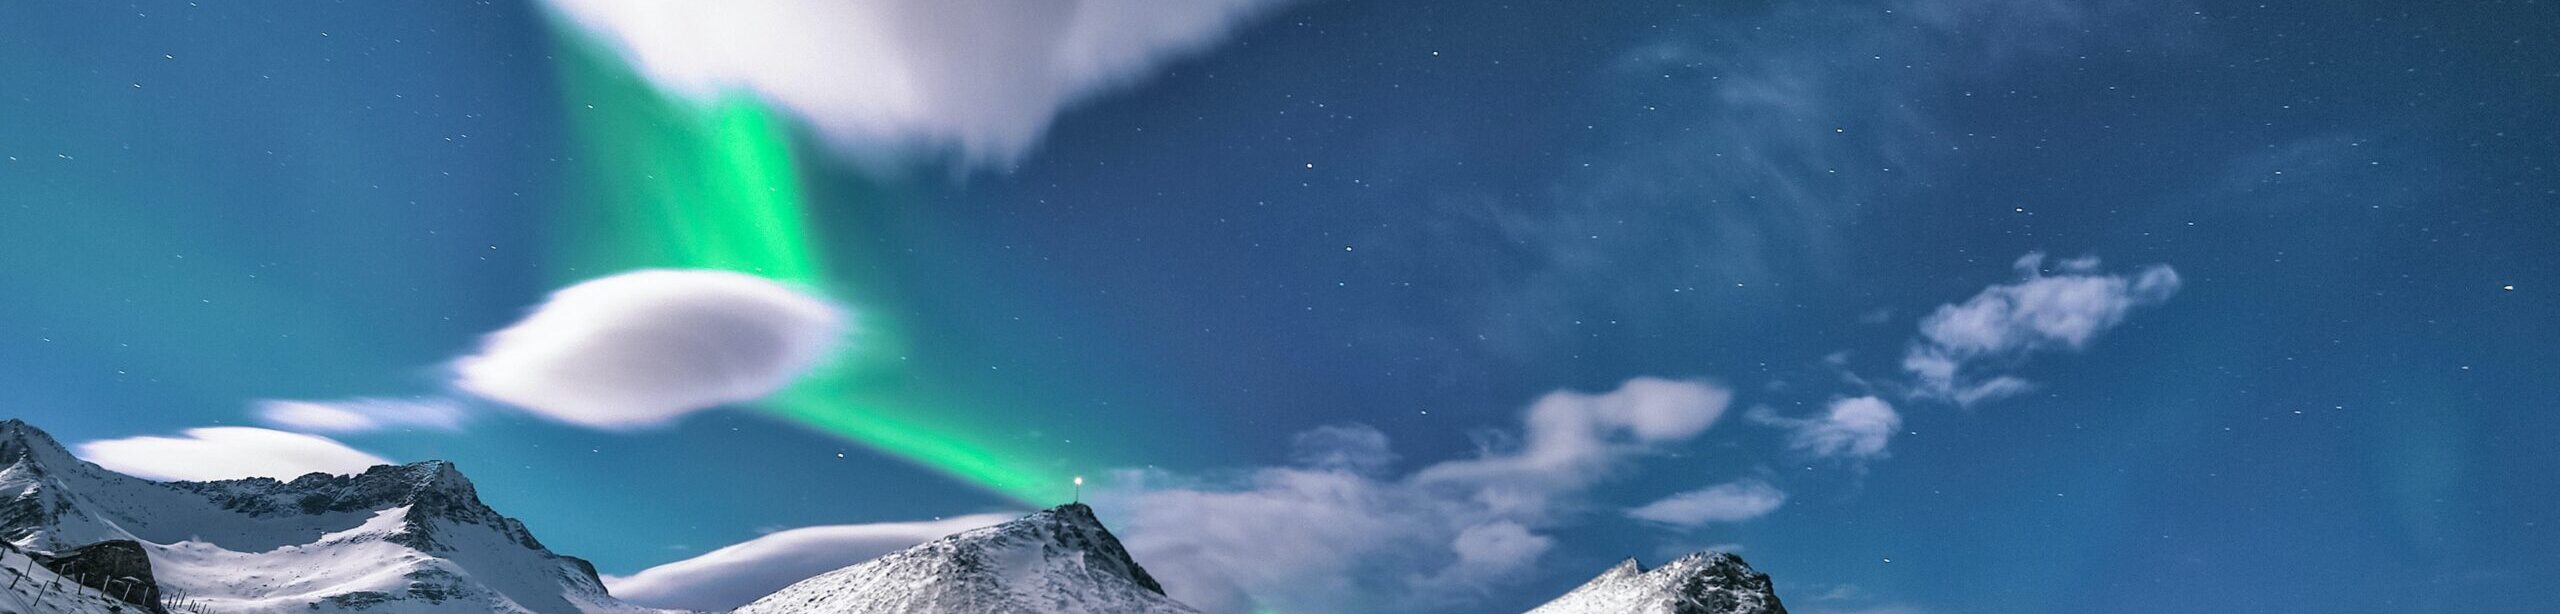 sky over snowy mountains with northern lights